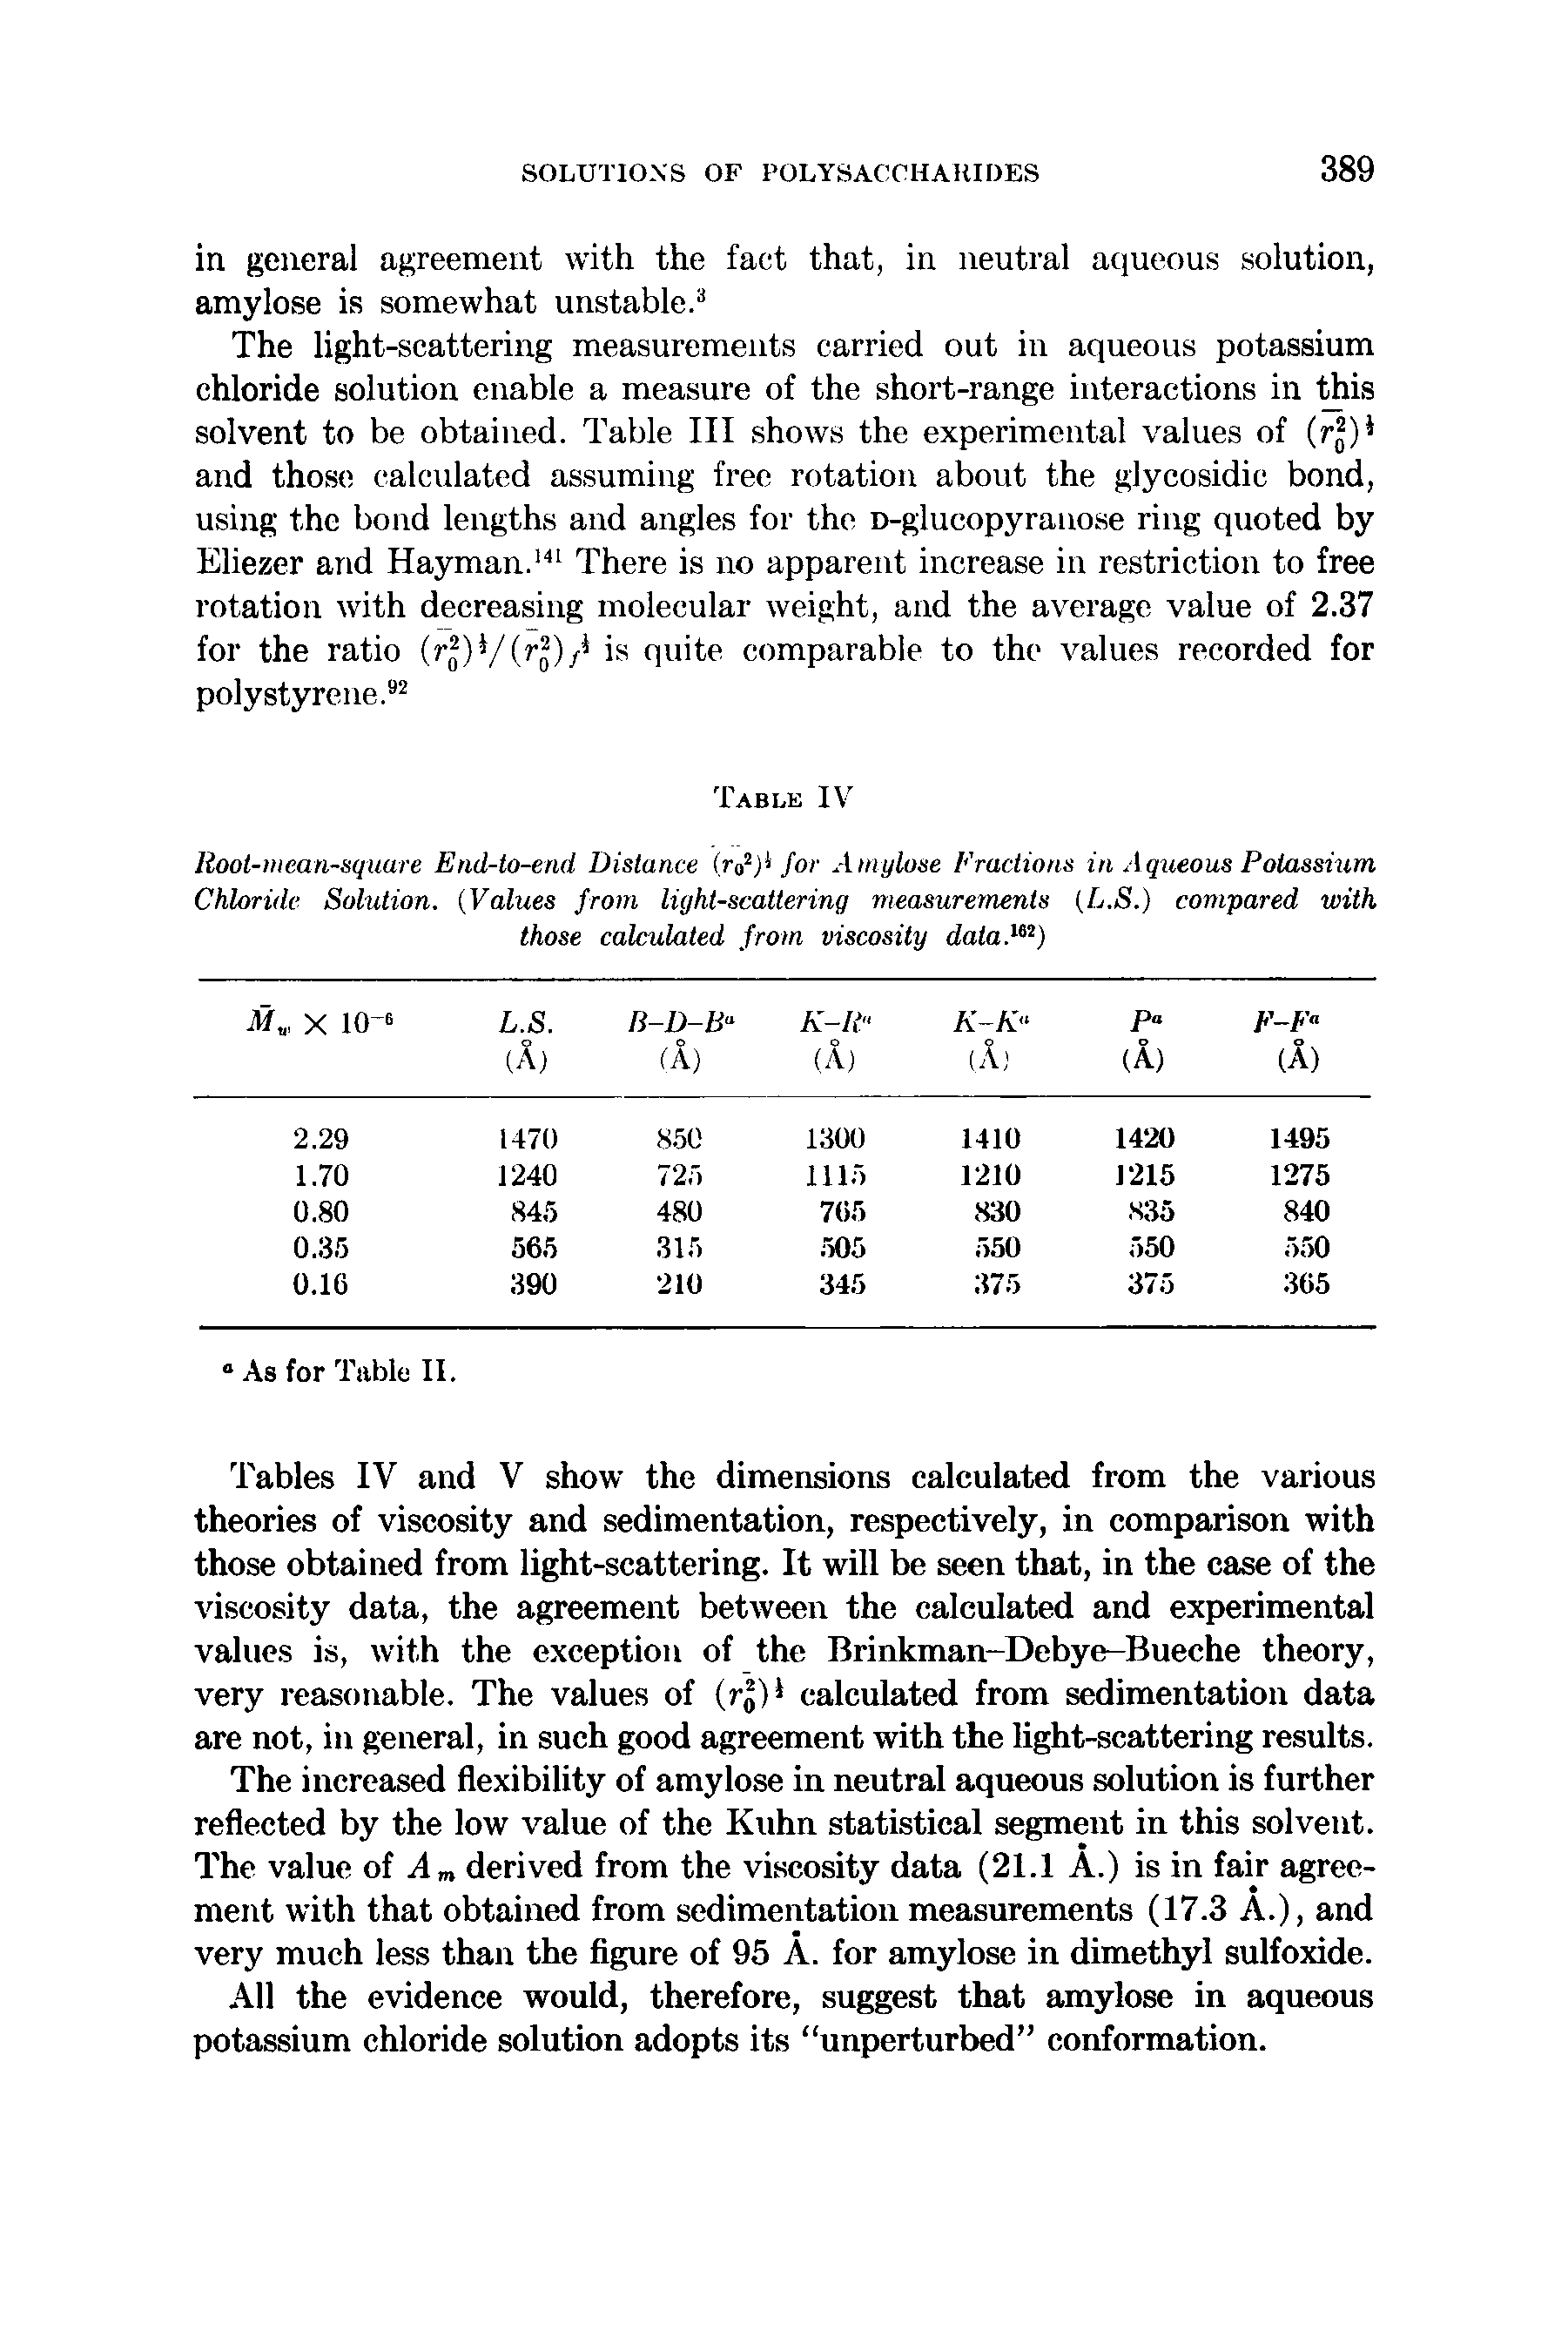 Tables IV and V show the dimensions calculated from the various theories of viscosity and sedimentation, respectively, in comparison with those obtained from light-scattering. It will be seen that, in the case of the viscosity data, the agreement between the calculated and experimental values is, with the exception of the Brinkman-Debye-Bueche theory, very reasonable. The values of (ro) calculated from sedimentation data are not, in general, in such good agreement with the light-scattering results.